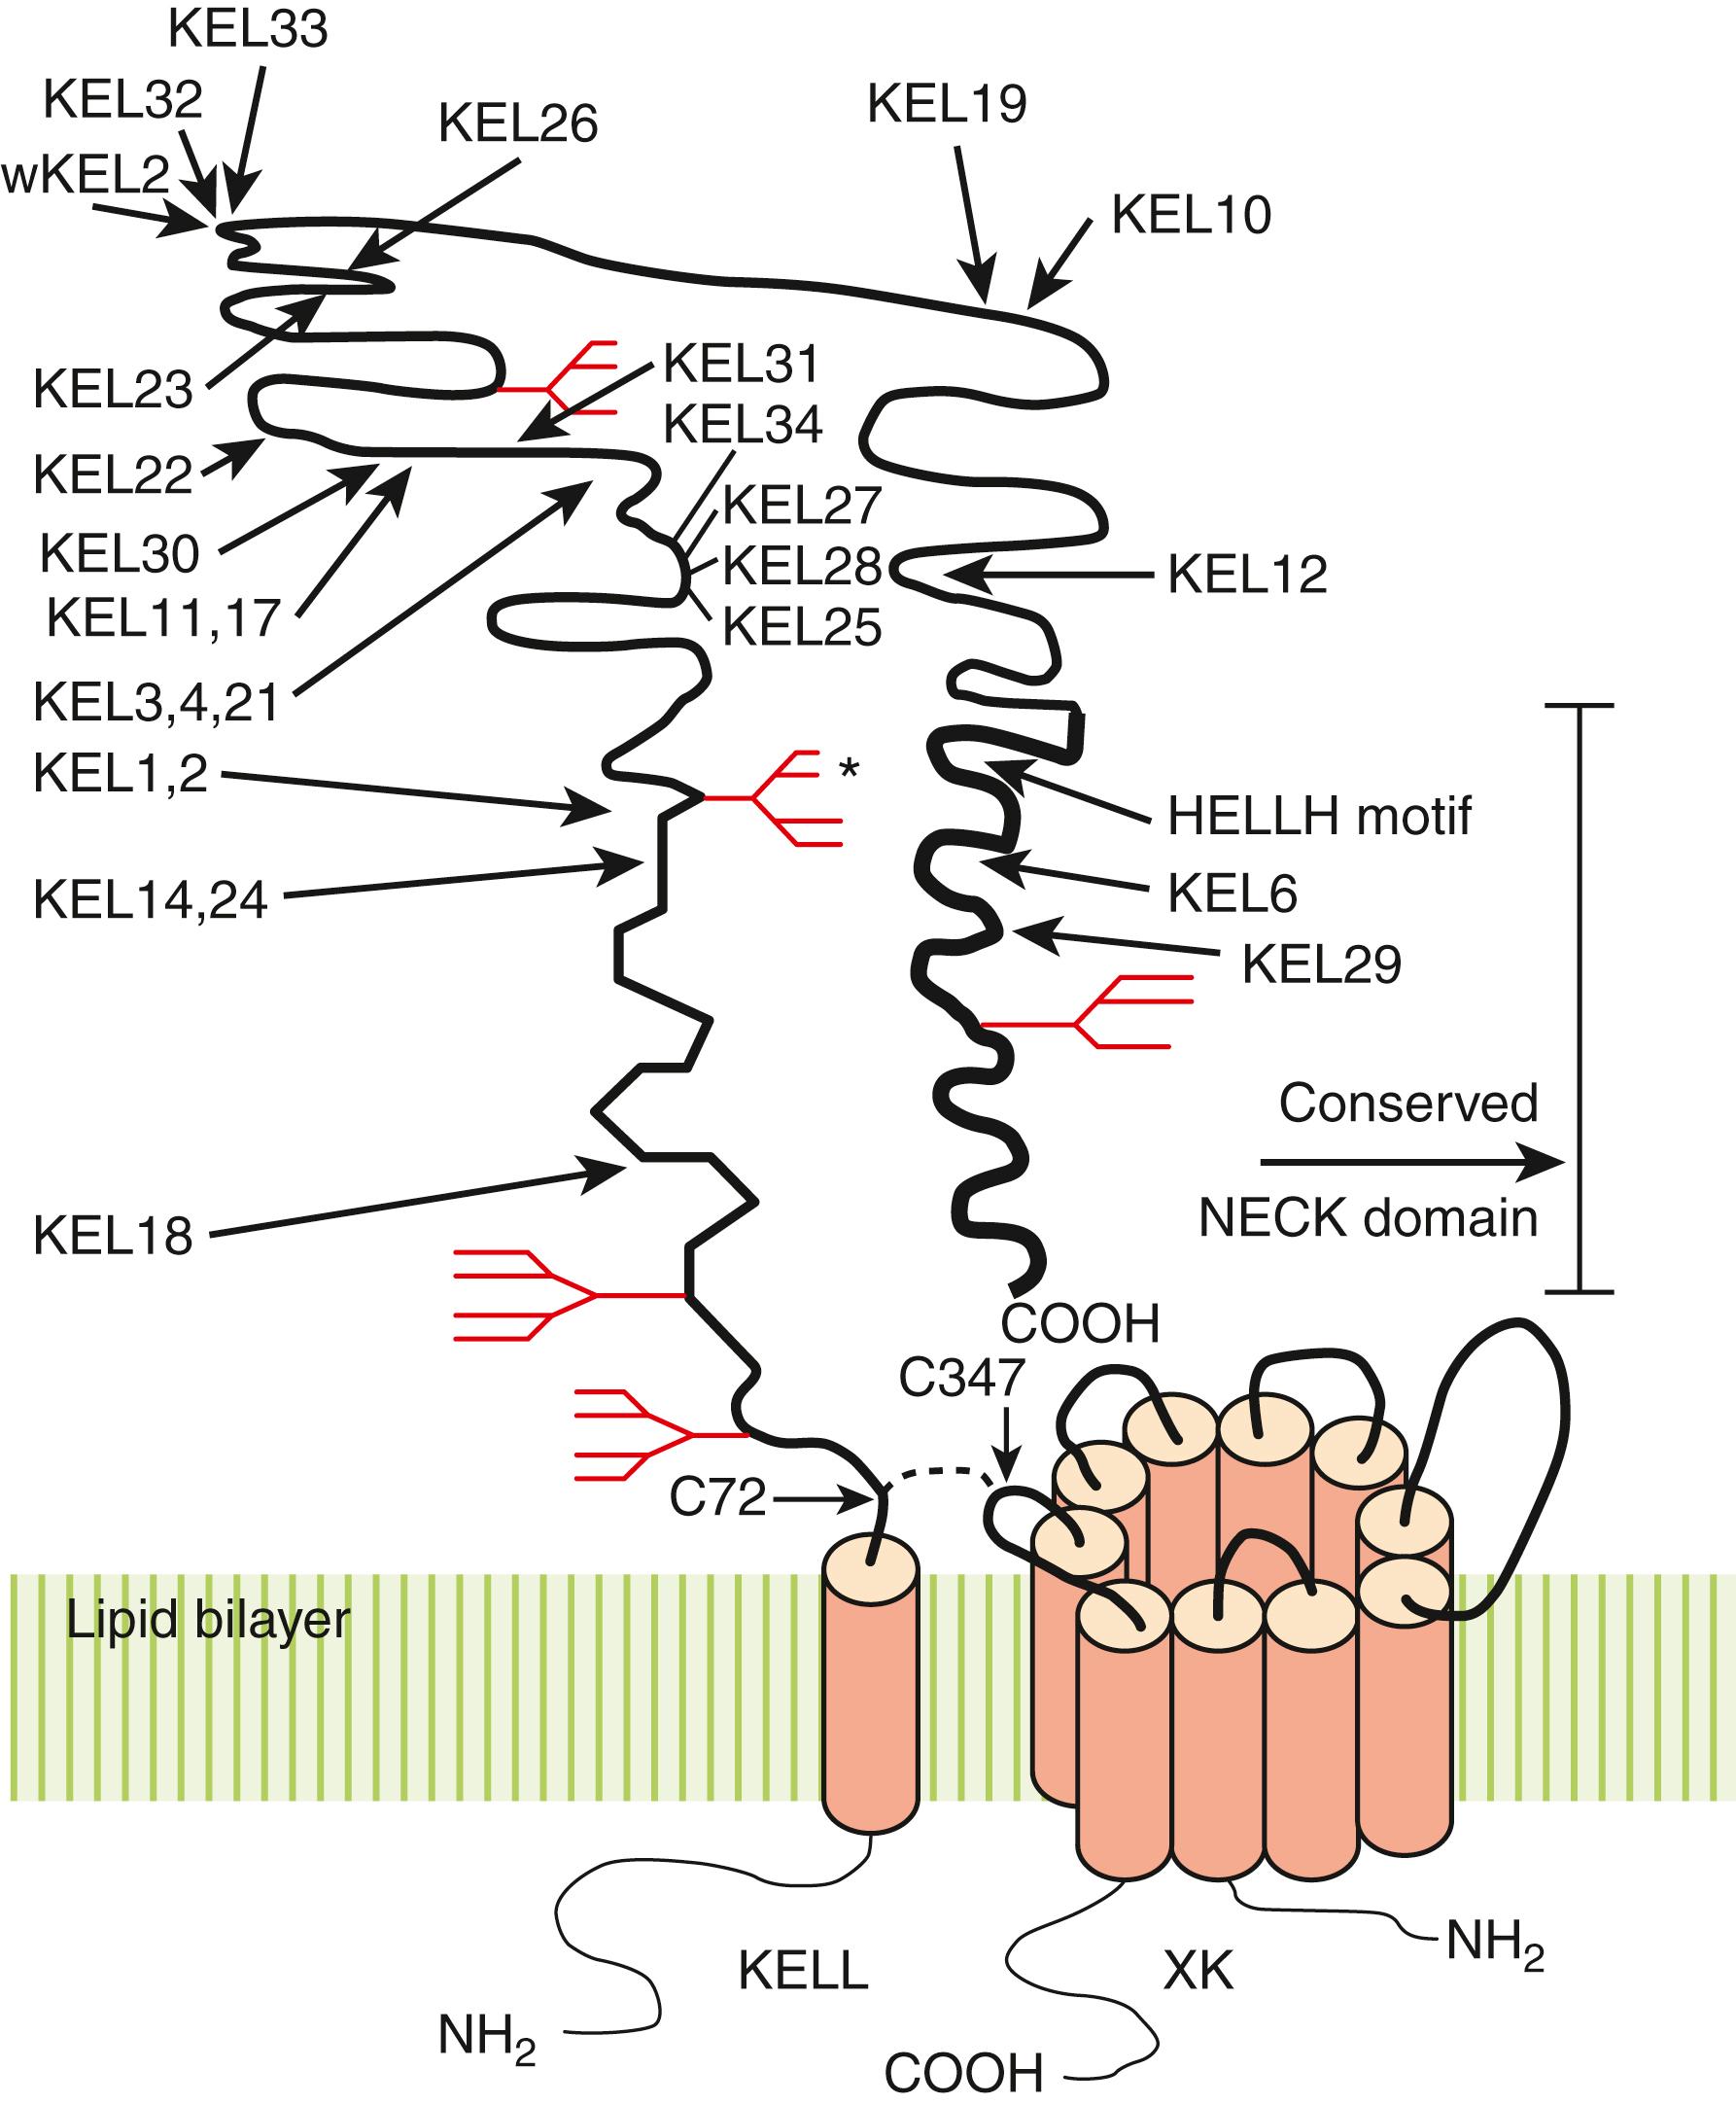 Figure 36.8, Diagram of KELL and XK protein. KELL is covalently linked to the XK protein by a disulfide bond (- - - -) through Cys72 of Kell and Cys347 of XK. The sites of different Kell antigens are indicated by solid lines . The highlighted area at the carboxy-terminus of KELL represents the domain sharing the most homology to other NECK family proteins (NEP-24.11, ECE-1, PEX). The zinc-binding motif (HELLH) is a consensus sequence shared by zinc-dependent metalloproteinases. The transmembrane domains of KELL and XK protein are indicated by solid amber cylinders . The N -glycosylation sites are indicated by branched structures . The N -glycosylation site marked by an asterisk is not present in individuals of the KEL1-positive phenotype.